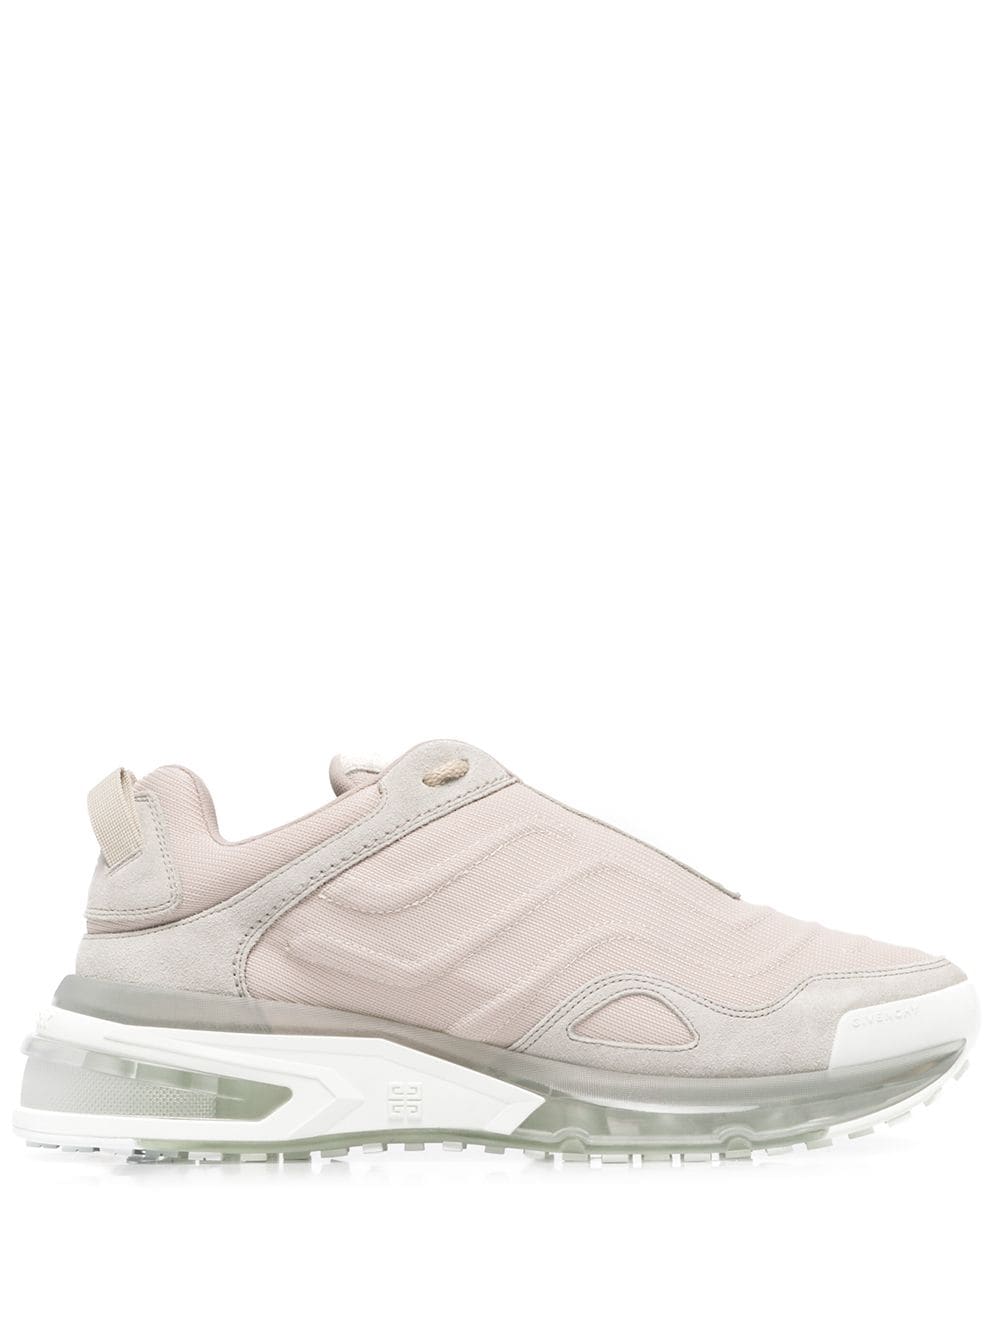 Givenchy City Low Sneakers - Nude von Givenchy